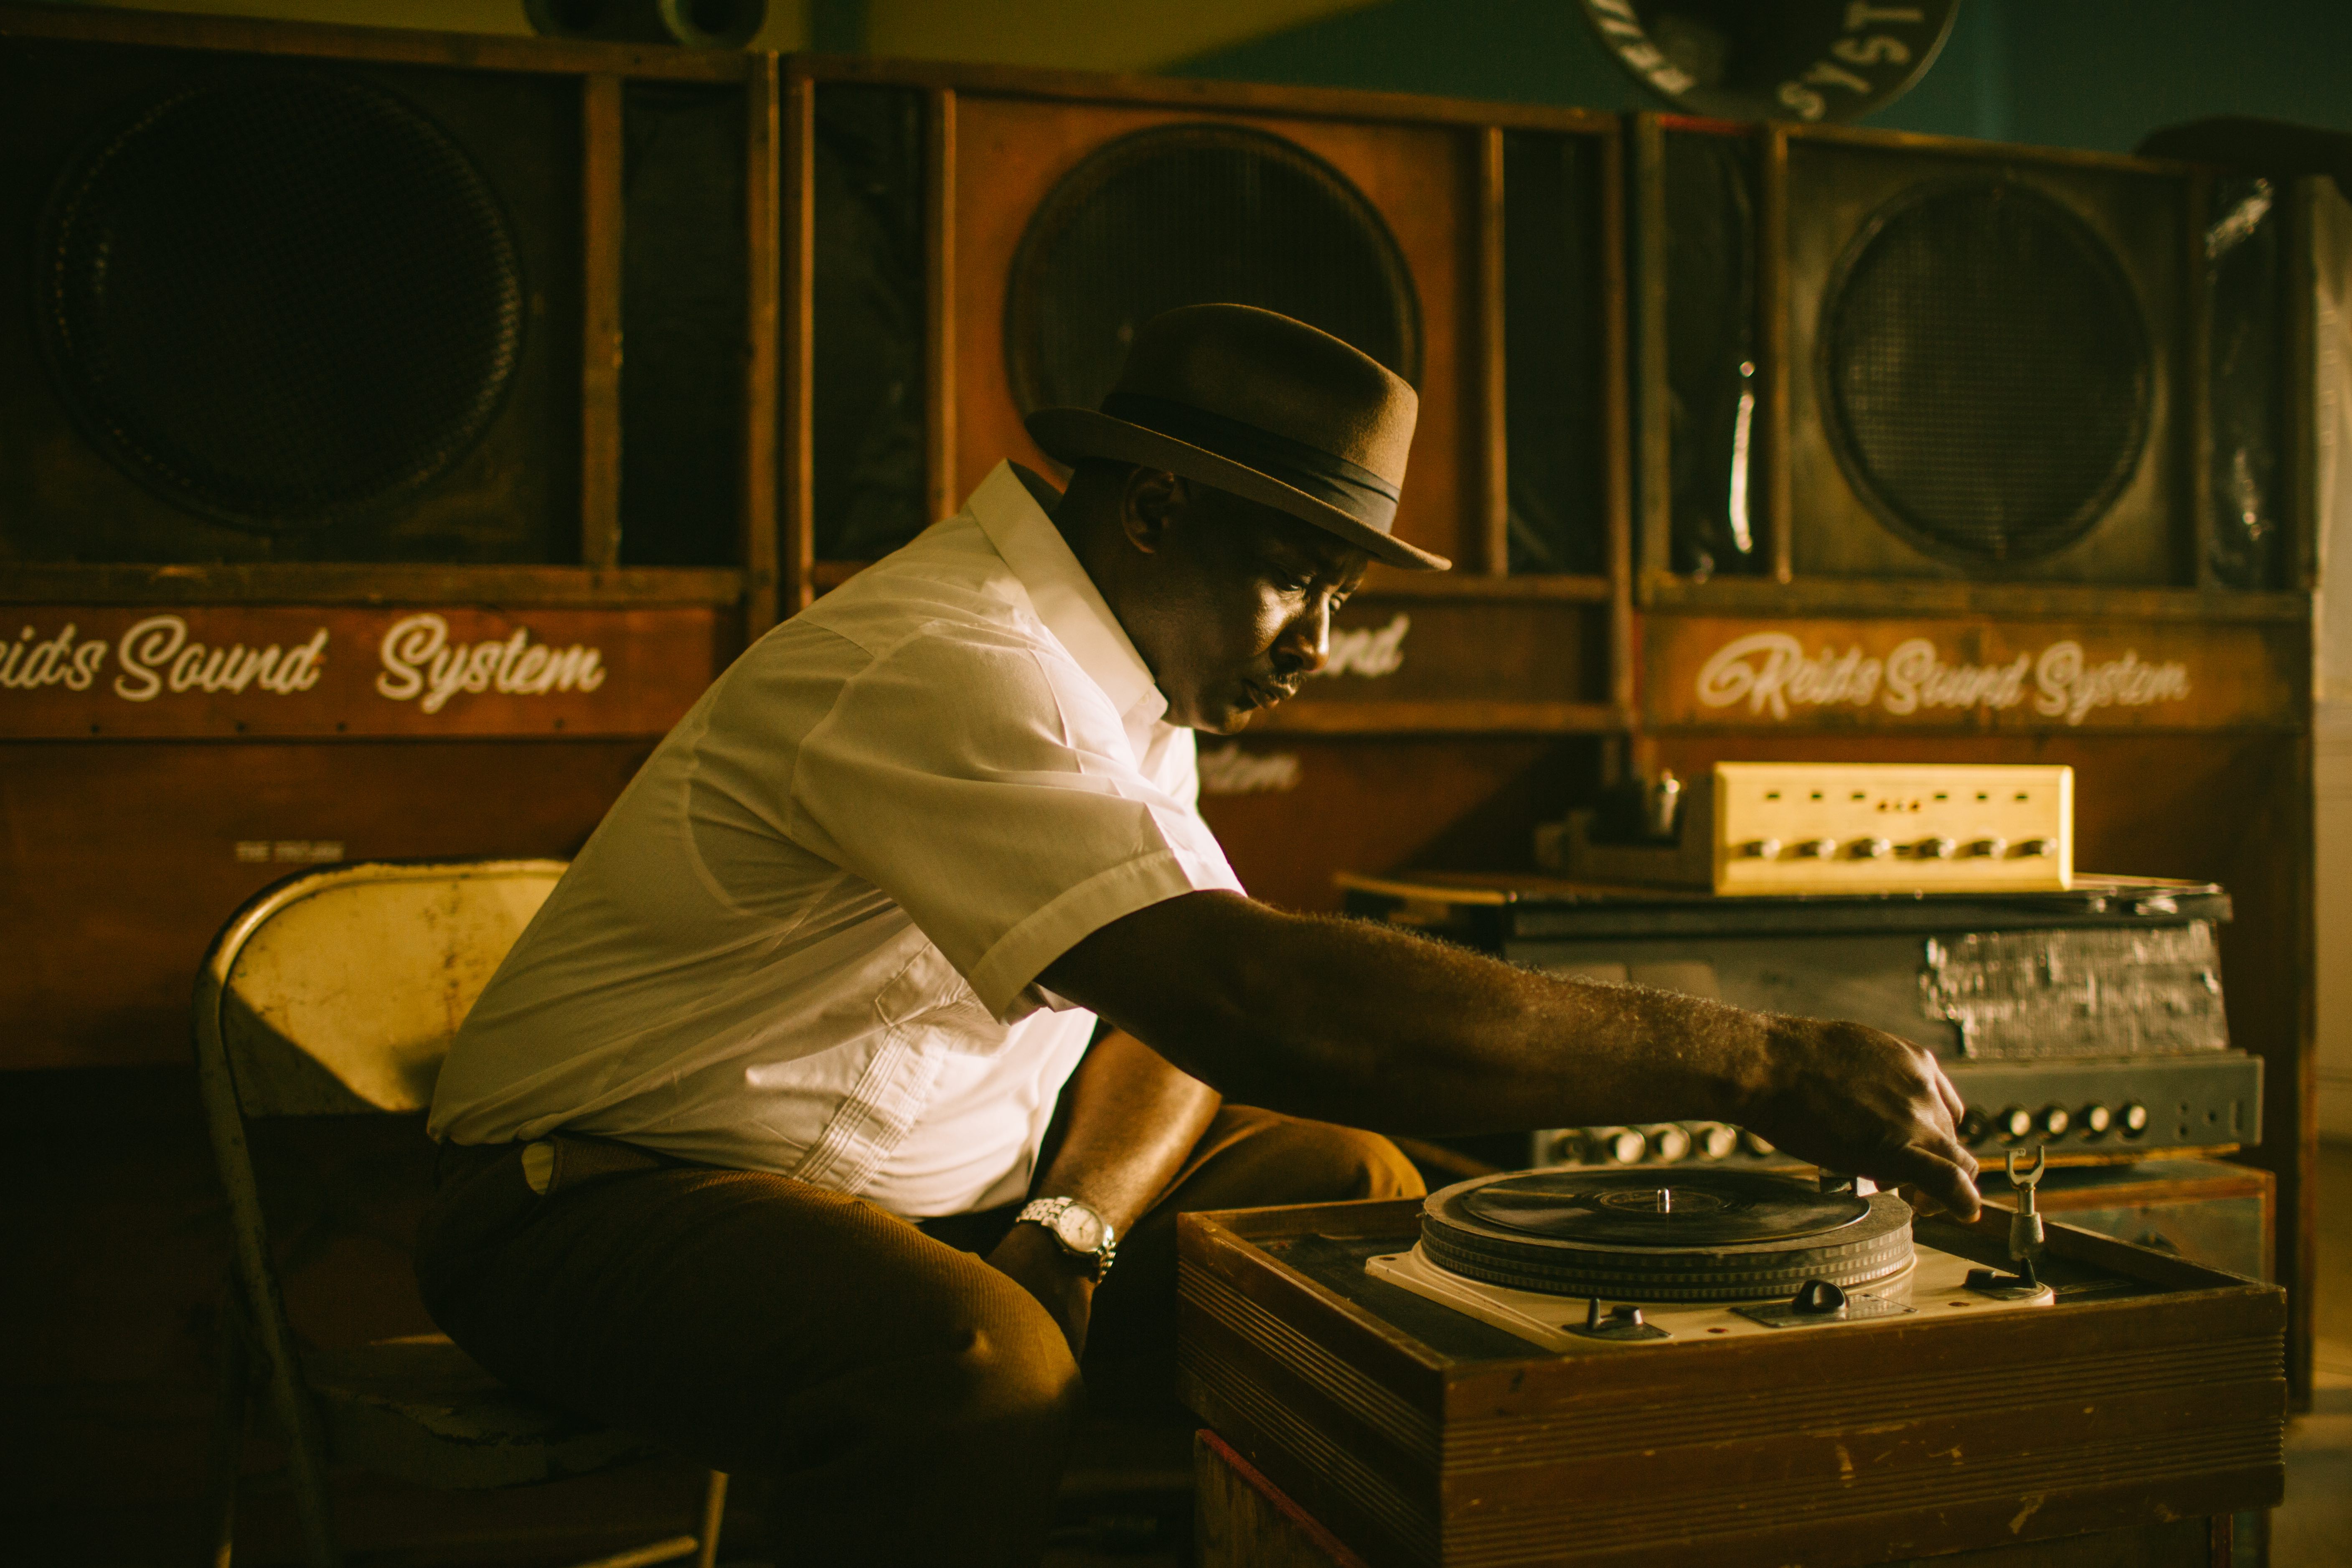 RUDEBOY: THE STORY OF TROJAN RECORDS